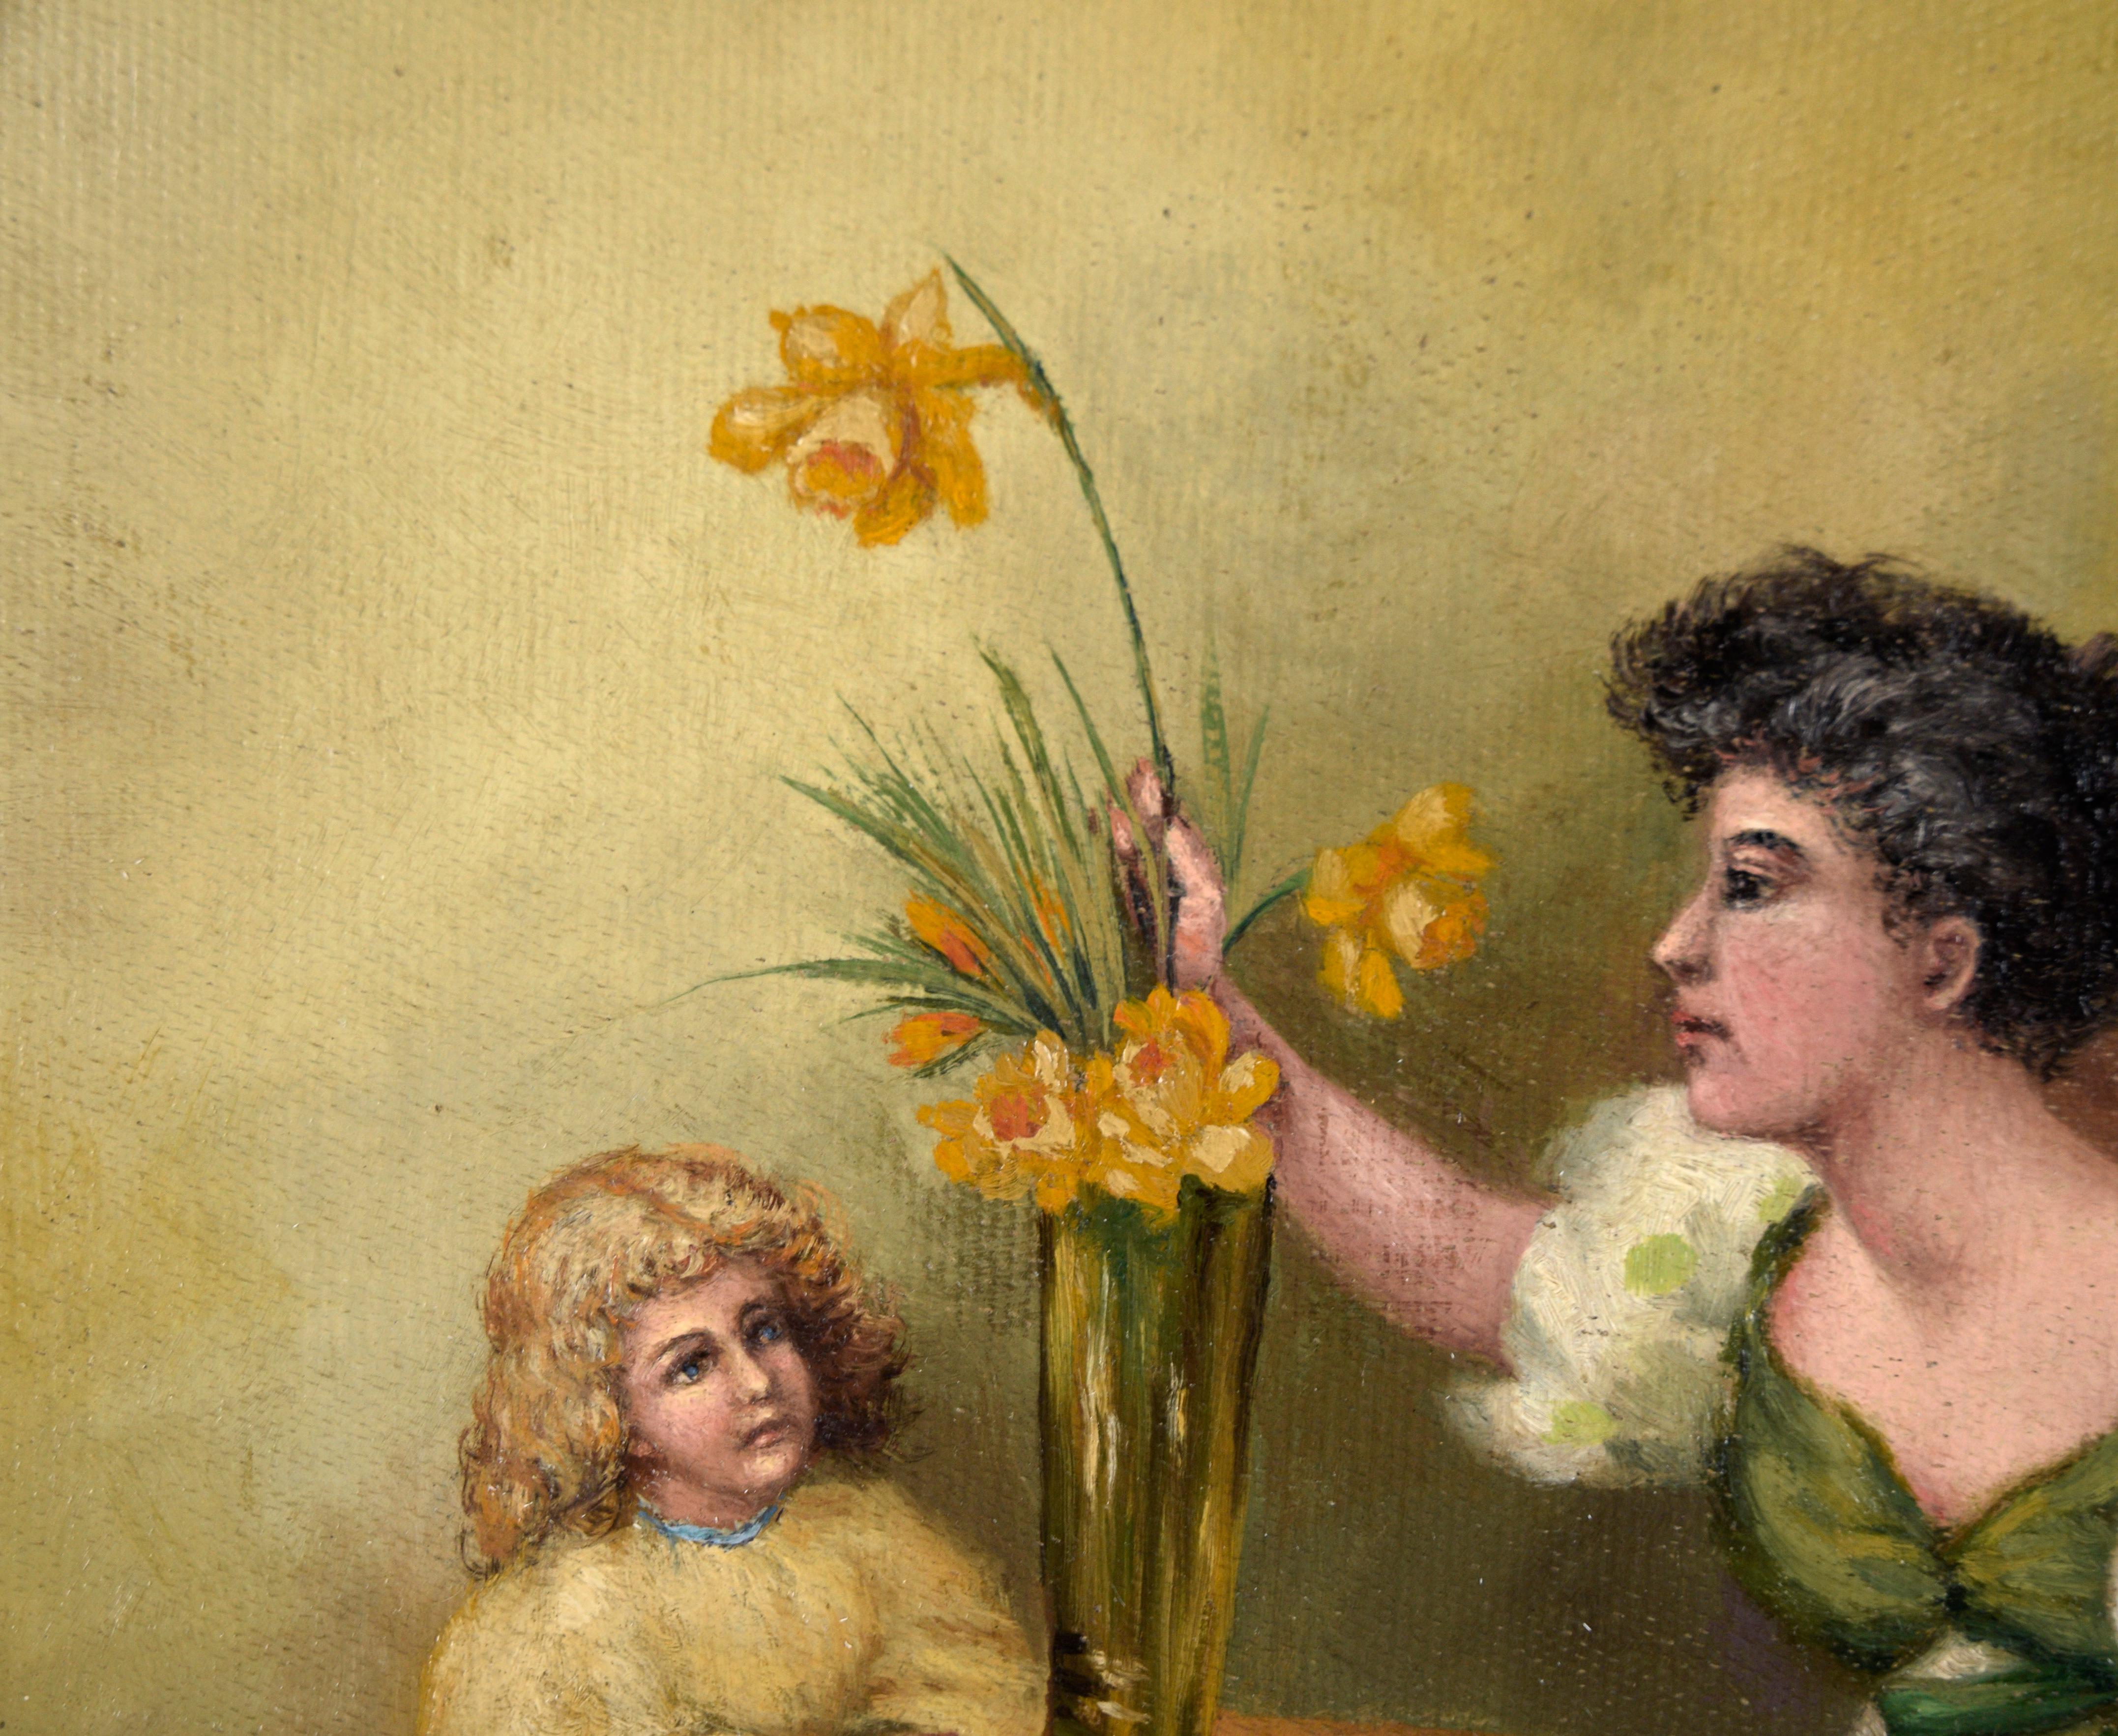 Mother and Daughter Arranging Daffodils in a Vase - Oil on Canvas

Charming depiction of a mother and daughter with daffodils by Lois Amelia Budlong-Phillips (American, 1857-1932). A woman with dark hair is wearing a white and green dress, seated at